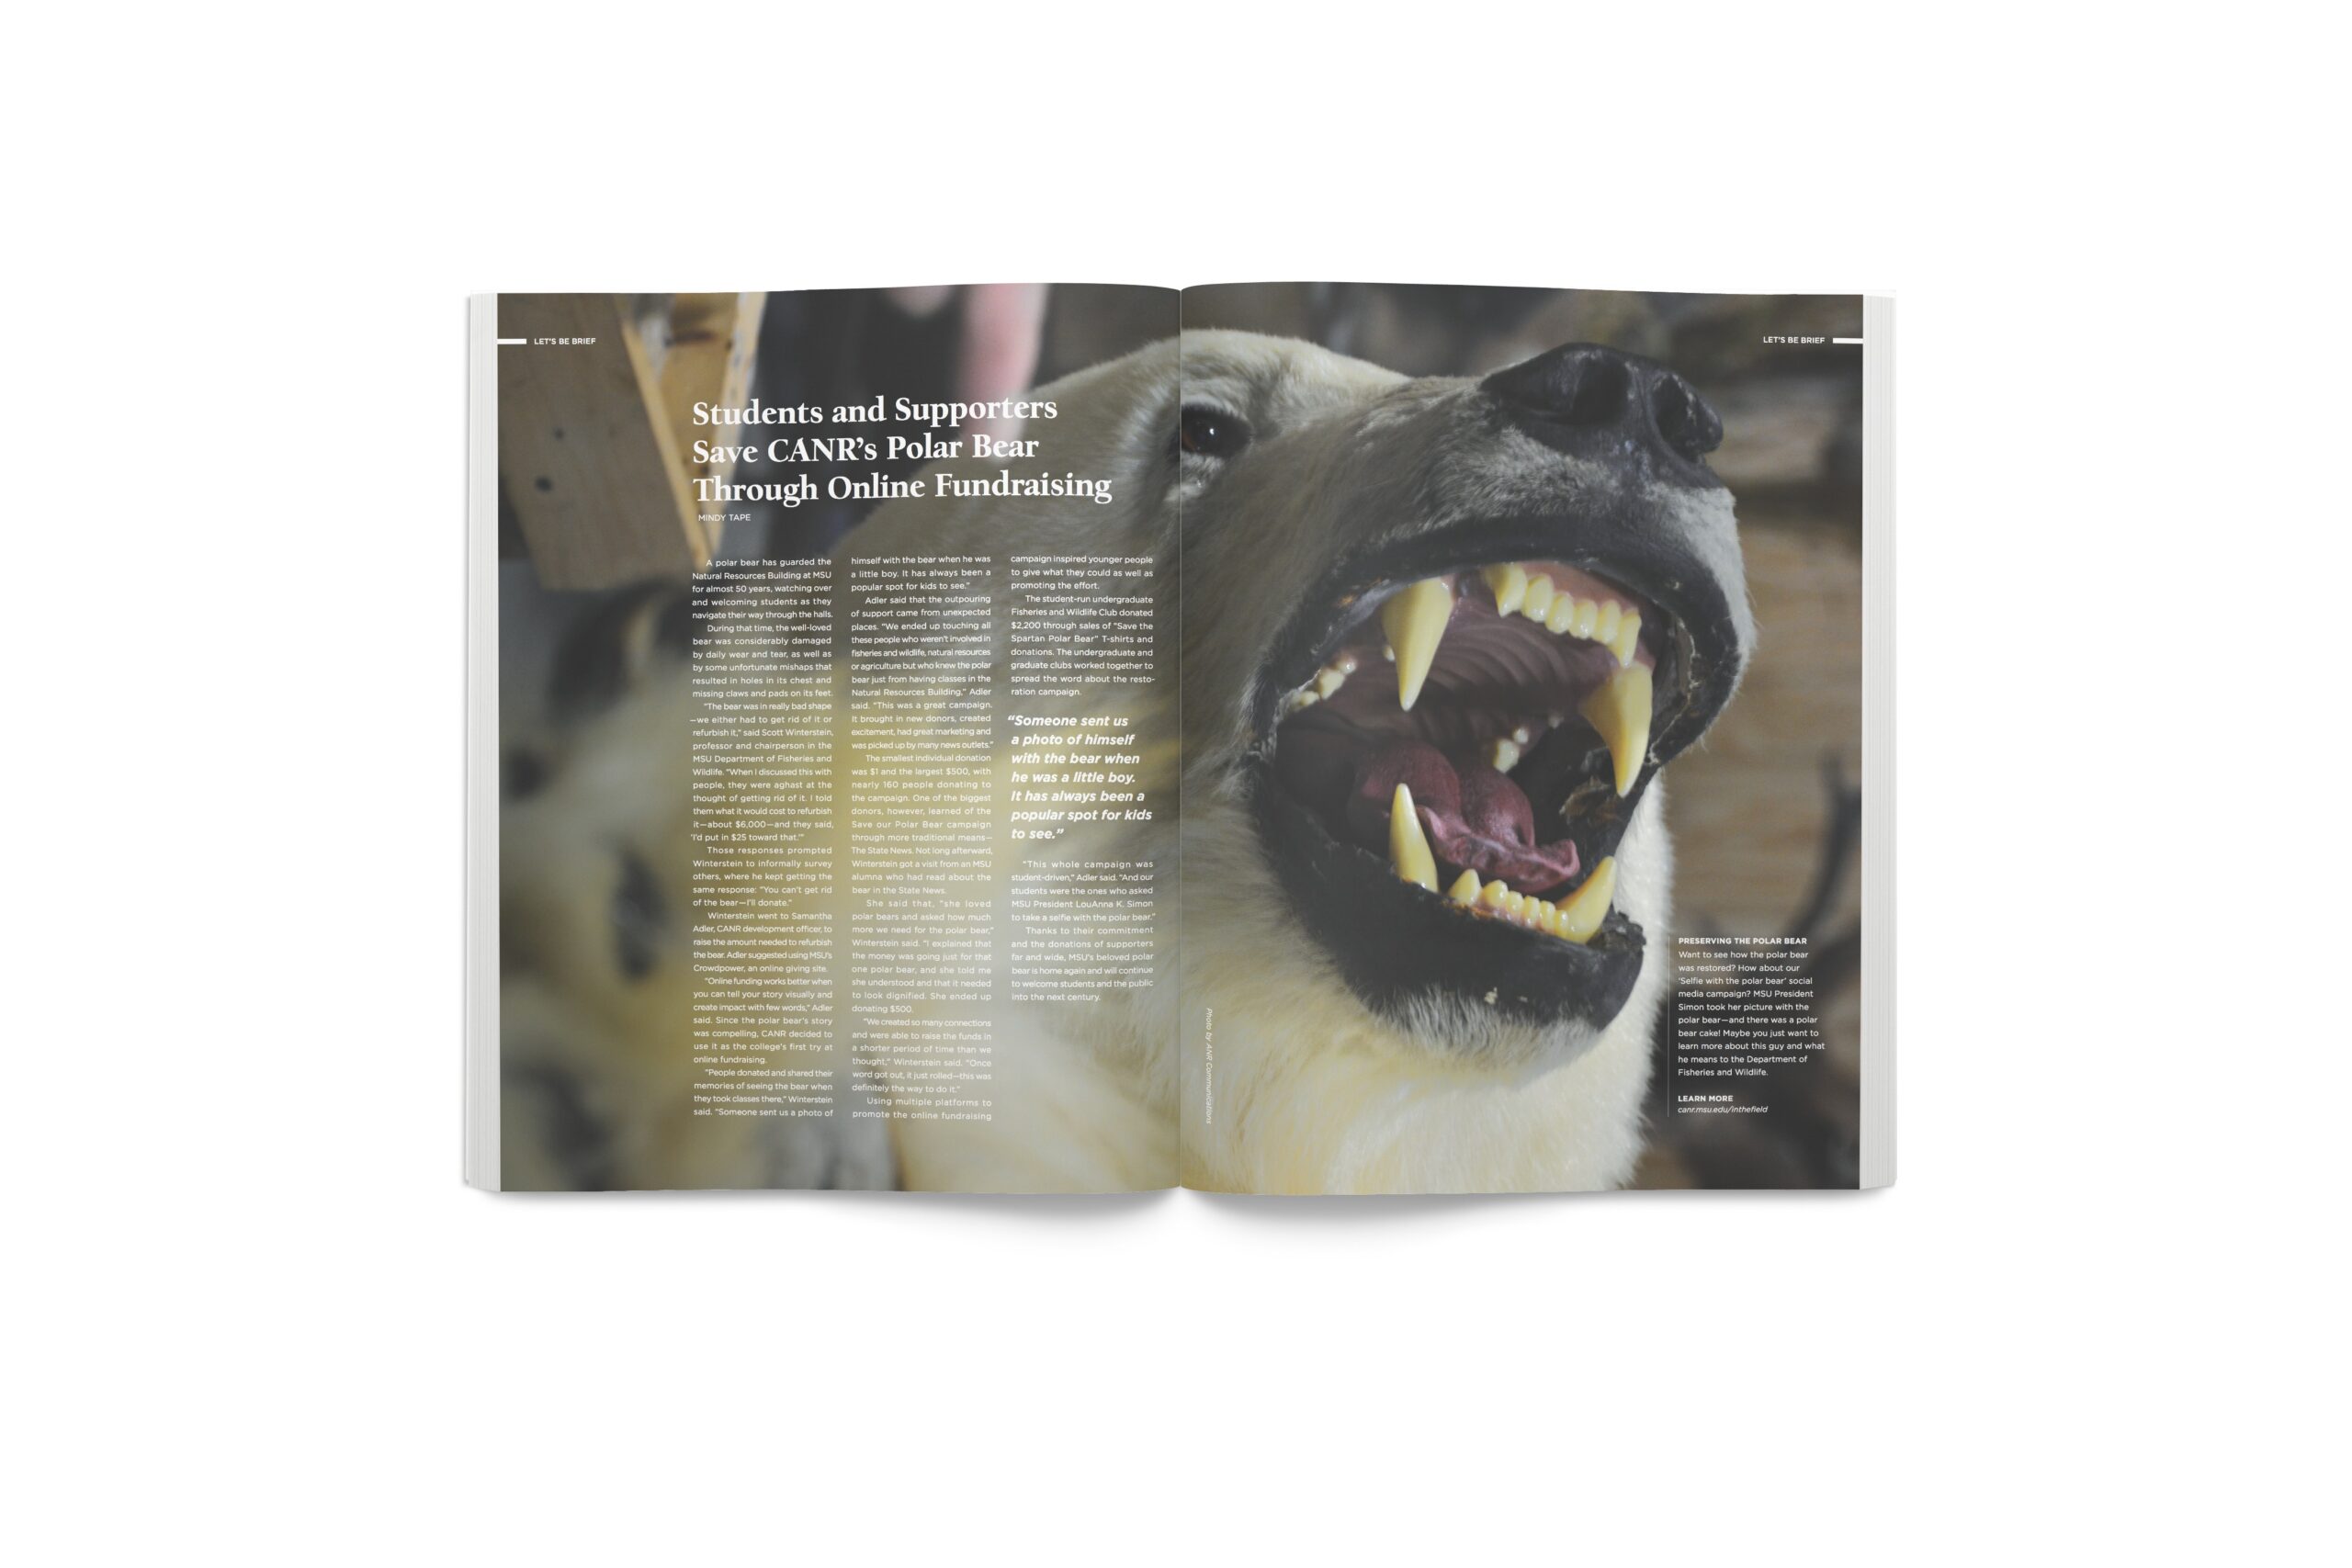 An image of a spread from In the Field. The spread features an image across both pages of a taxidermic polar bear which is housed in the College of Agriculture and Natural resources building at Michigan State University.